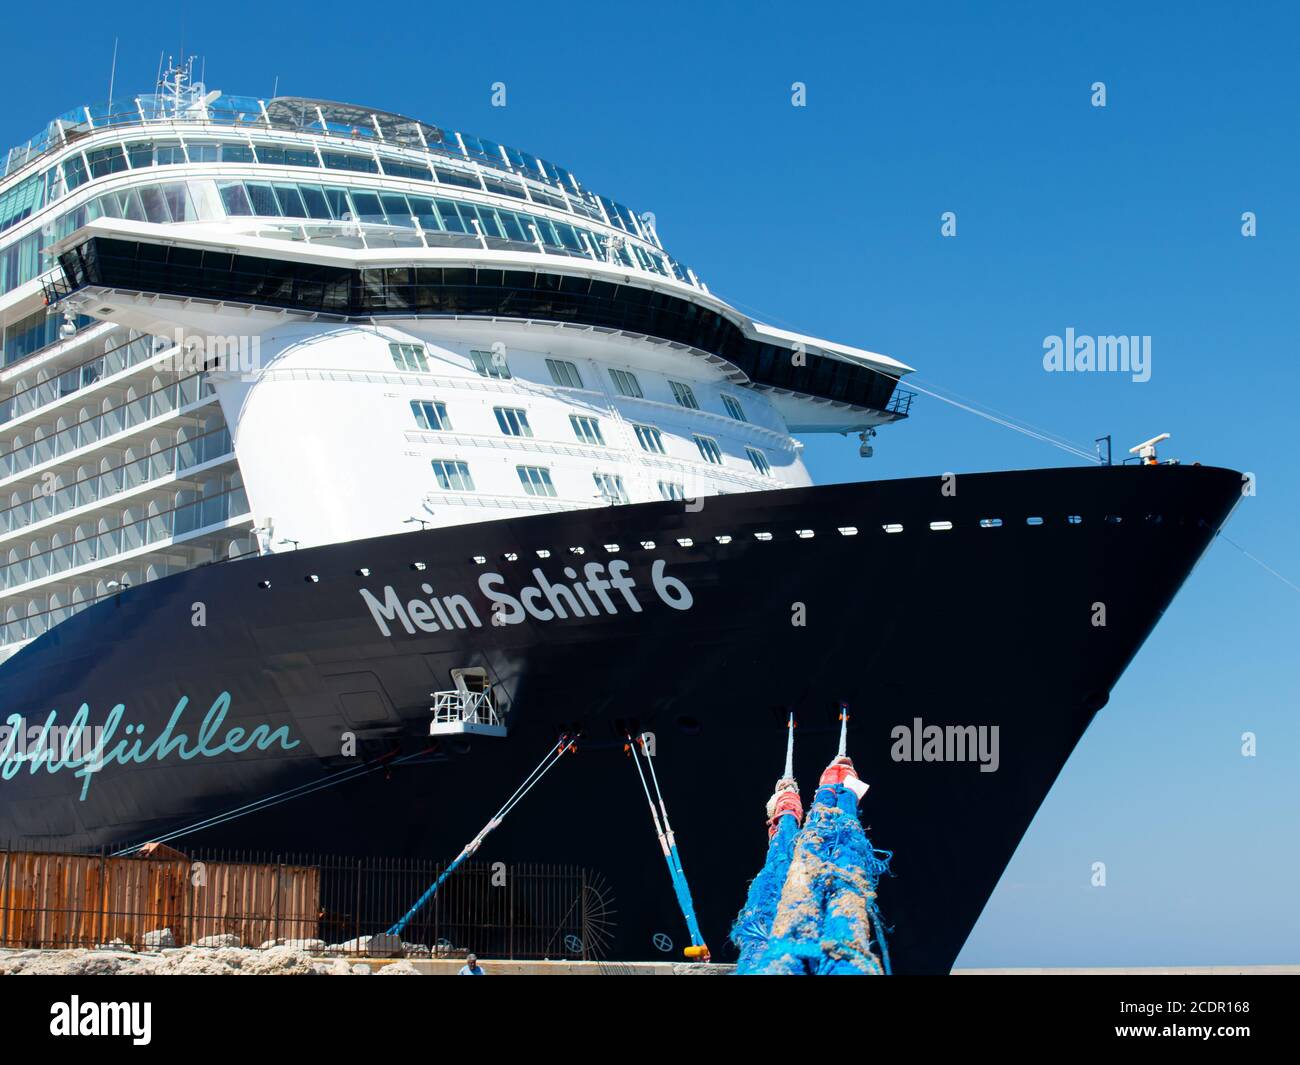 Rhodes, Greece - July 3, 2019 - Side view of the cruise ship of the TUI Cruises shipping company named 'Mein Schiff 6' moored in the port of Rhodes, G Stock Photo